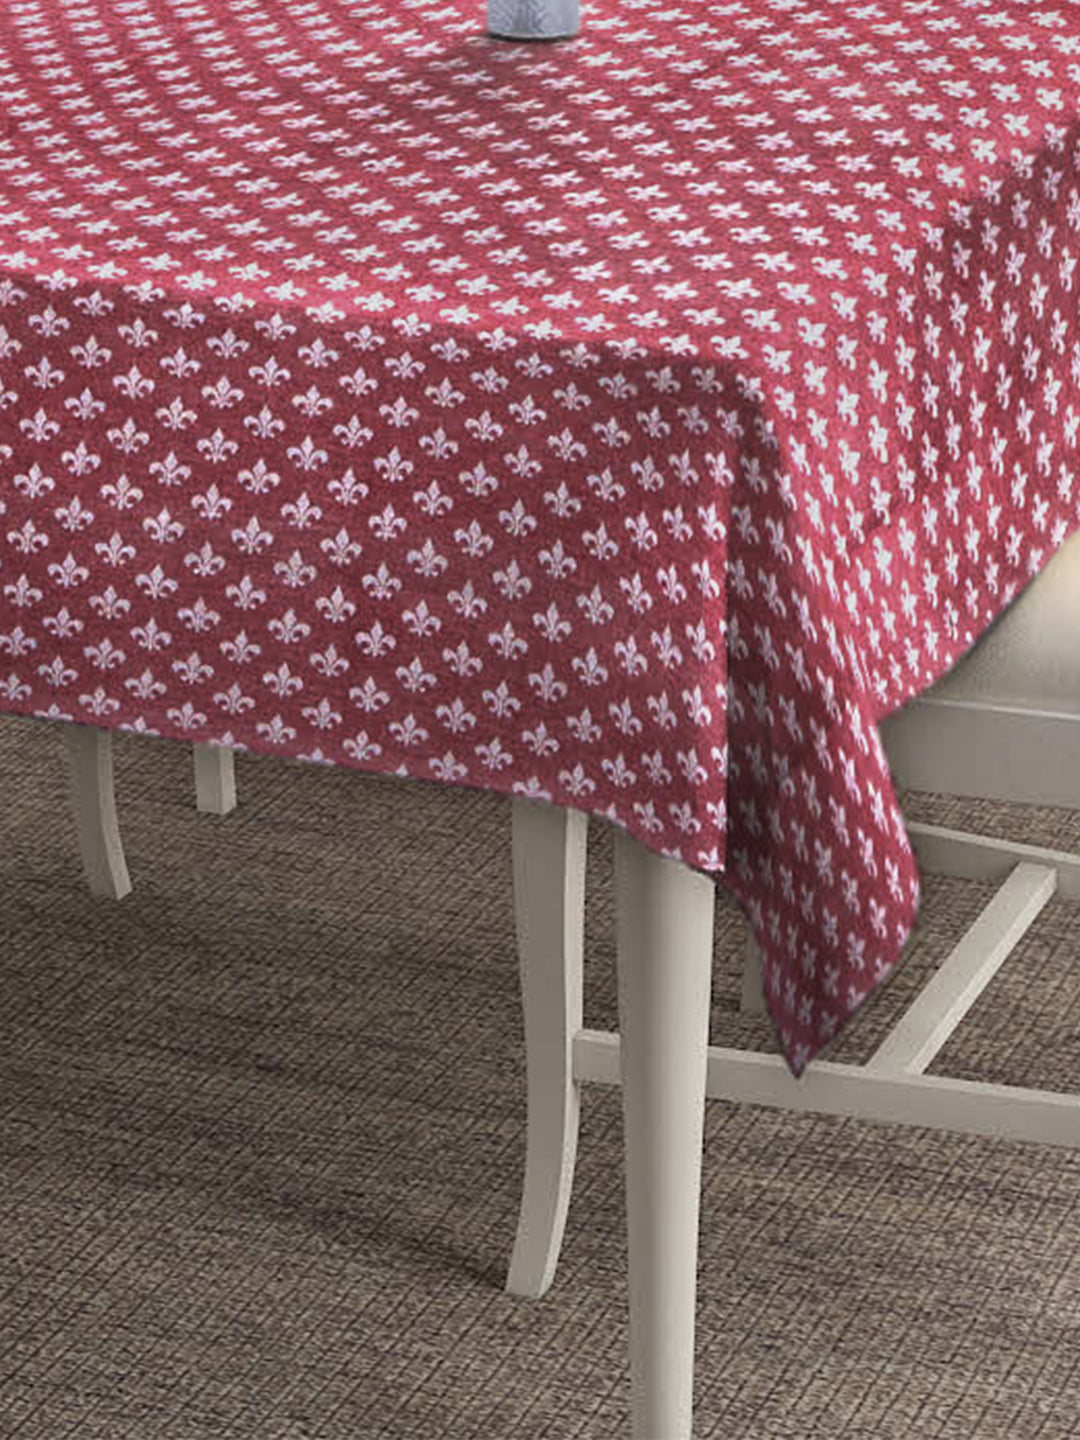 Arrabi Red Indian Handwoven Cotton  6 Seater Table Cover (225 x 150 cm)